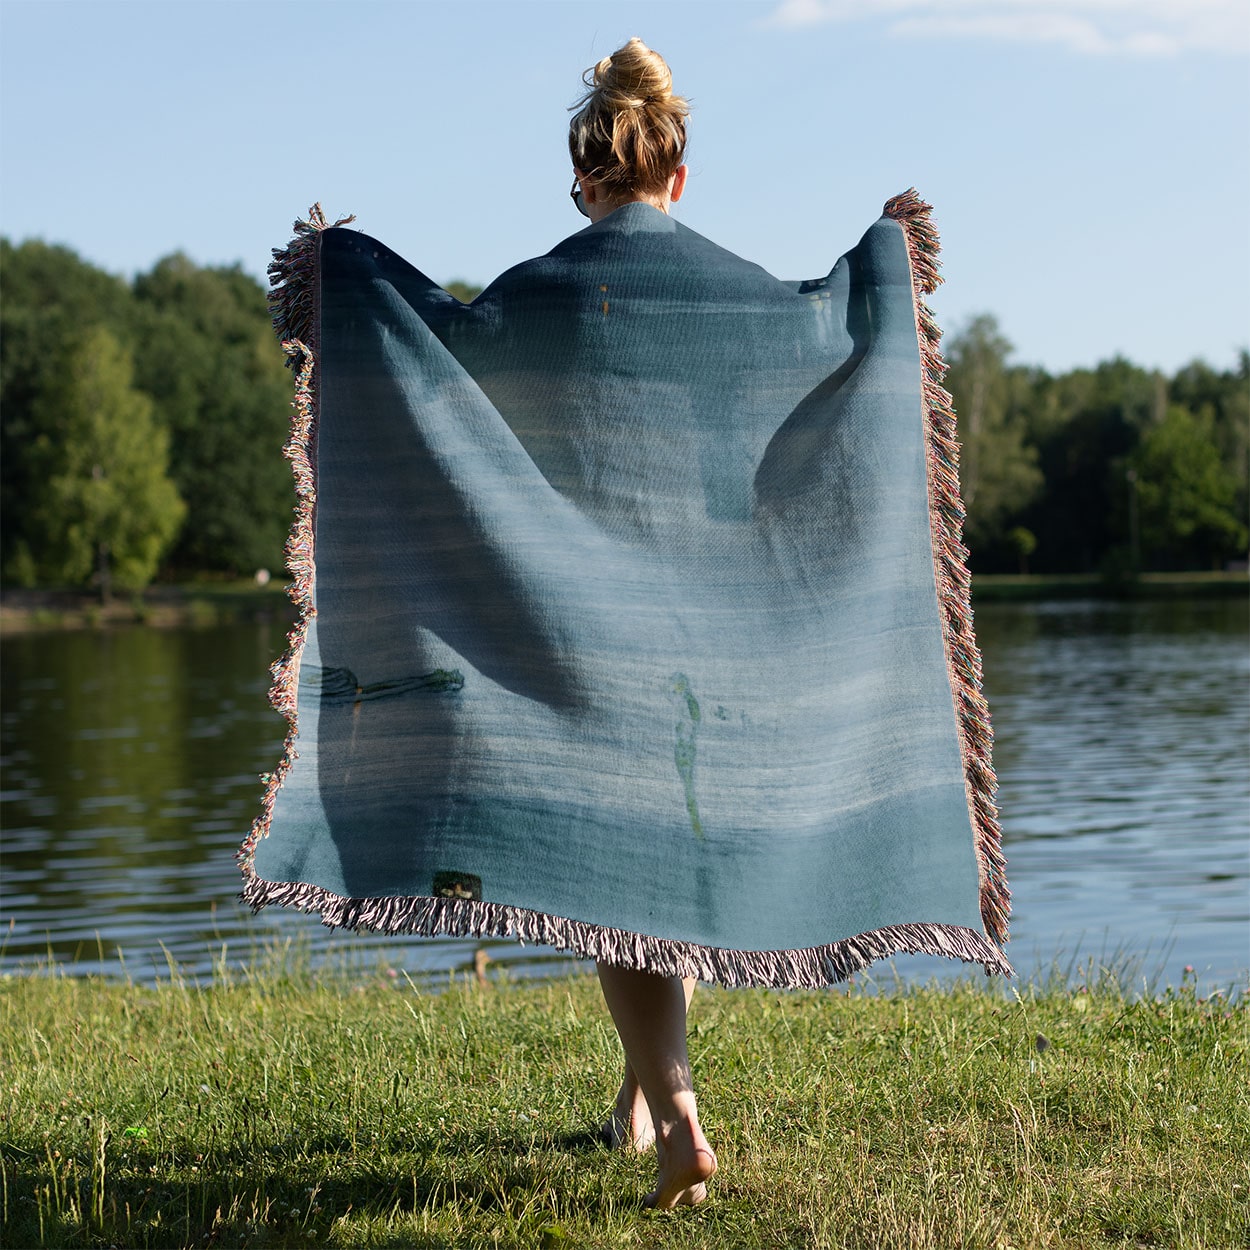 Light Blue Abstract Woven Blanket Held Up Outside